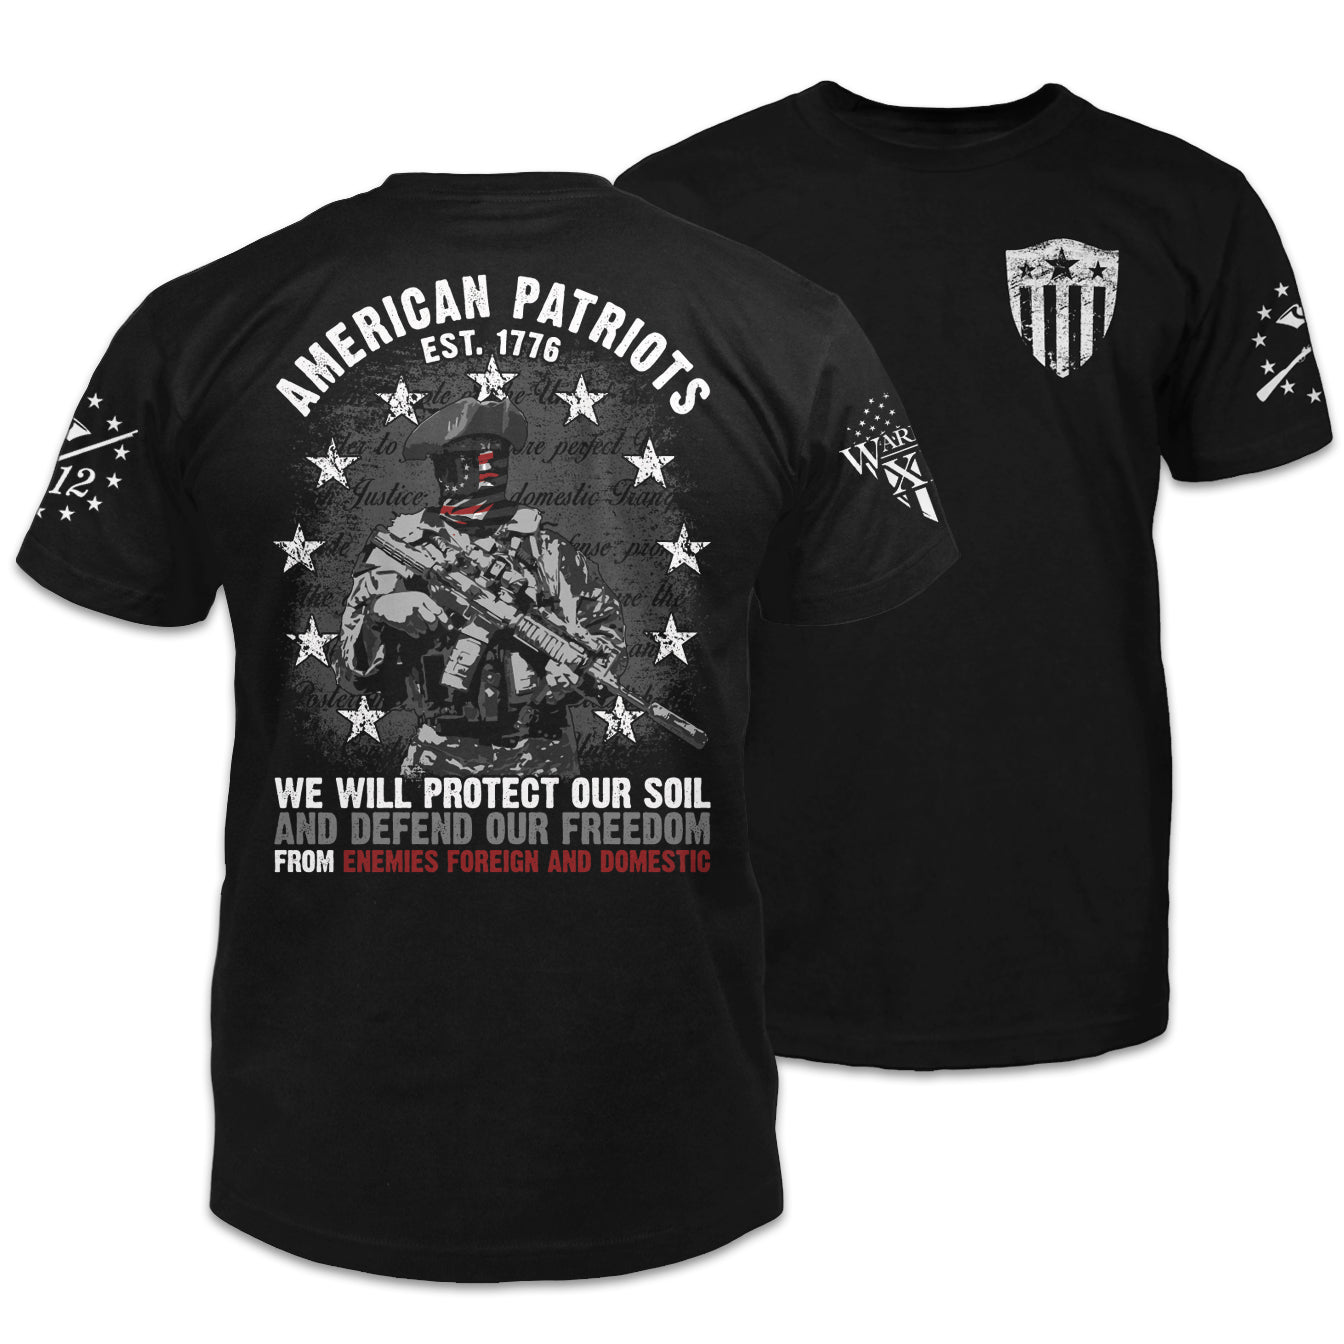 Front & back black t-shirt with the "American patriots" printed on the shirt.